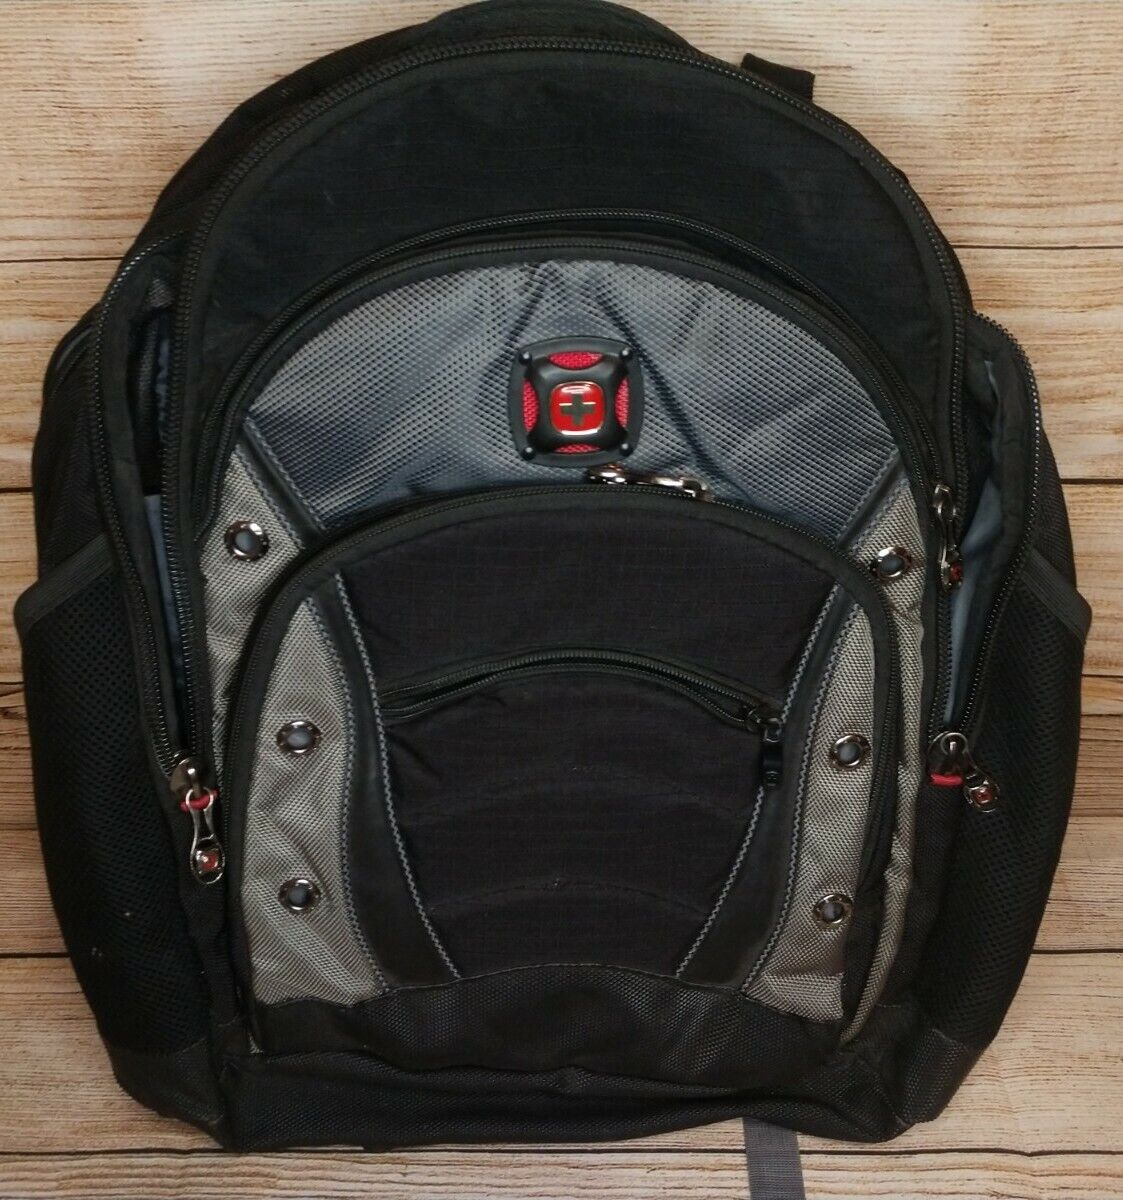 ~Awesome Swiss Gear by Wenger BLK/GRY Synergy Computer Backpack Fits Laptop!